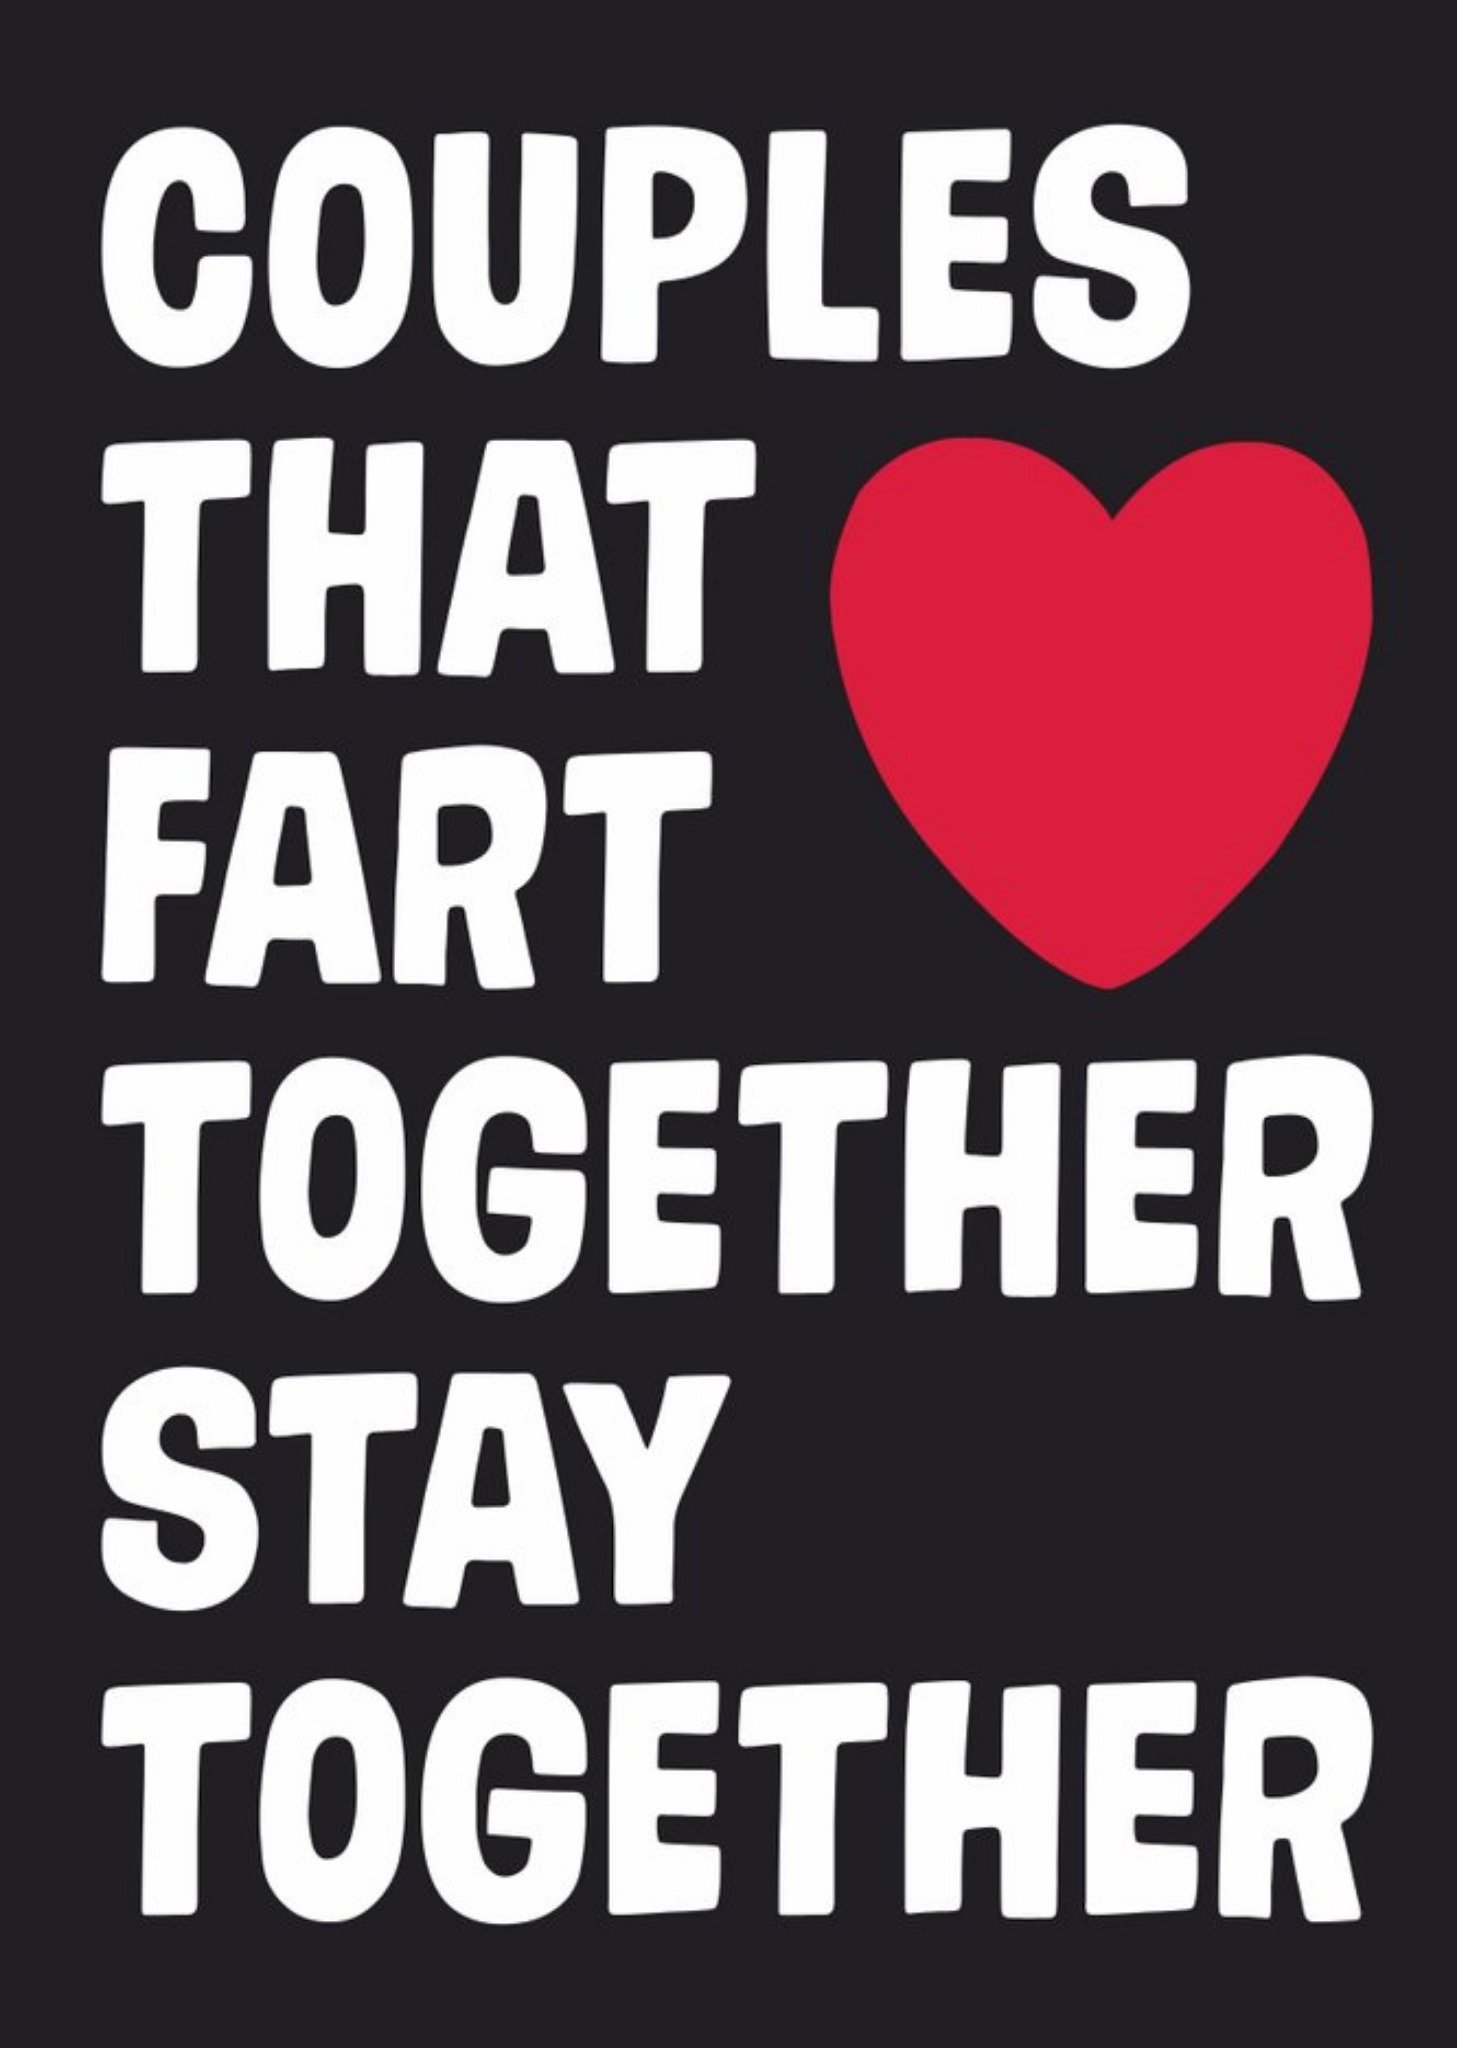 Moonpig Dean Morris Couples That Fart Together Stay Together Funny Valentine's Day Card, Large